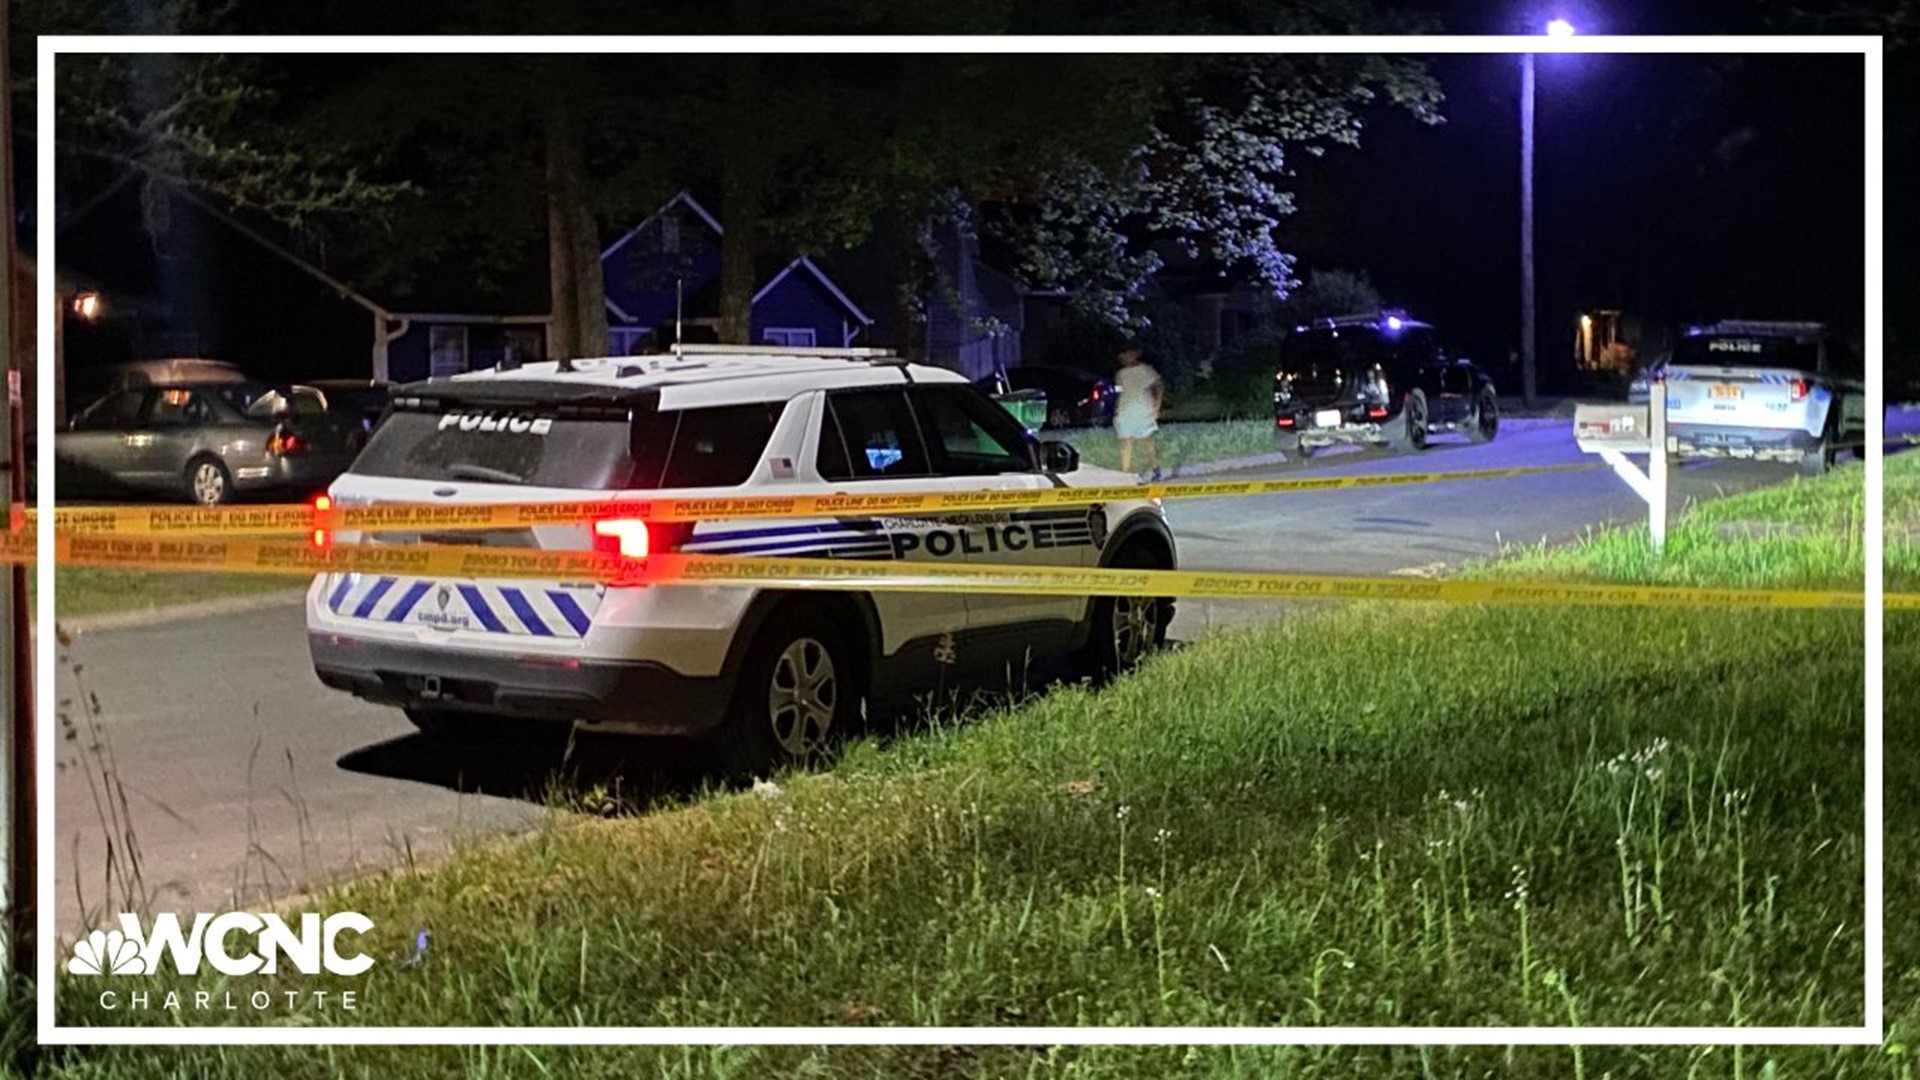 A 1-year-old boy was seriously injured when he was shot at a home in east Charlotte early Tuesday, police said.